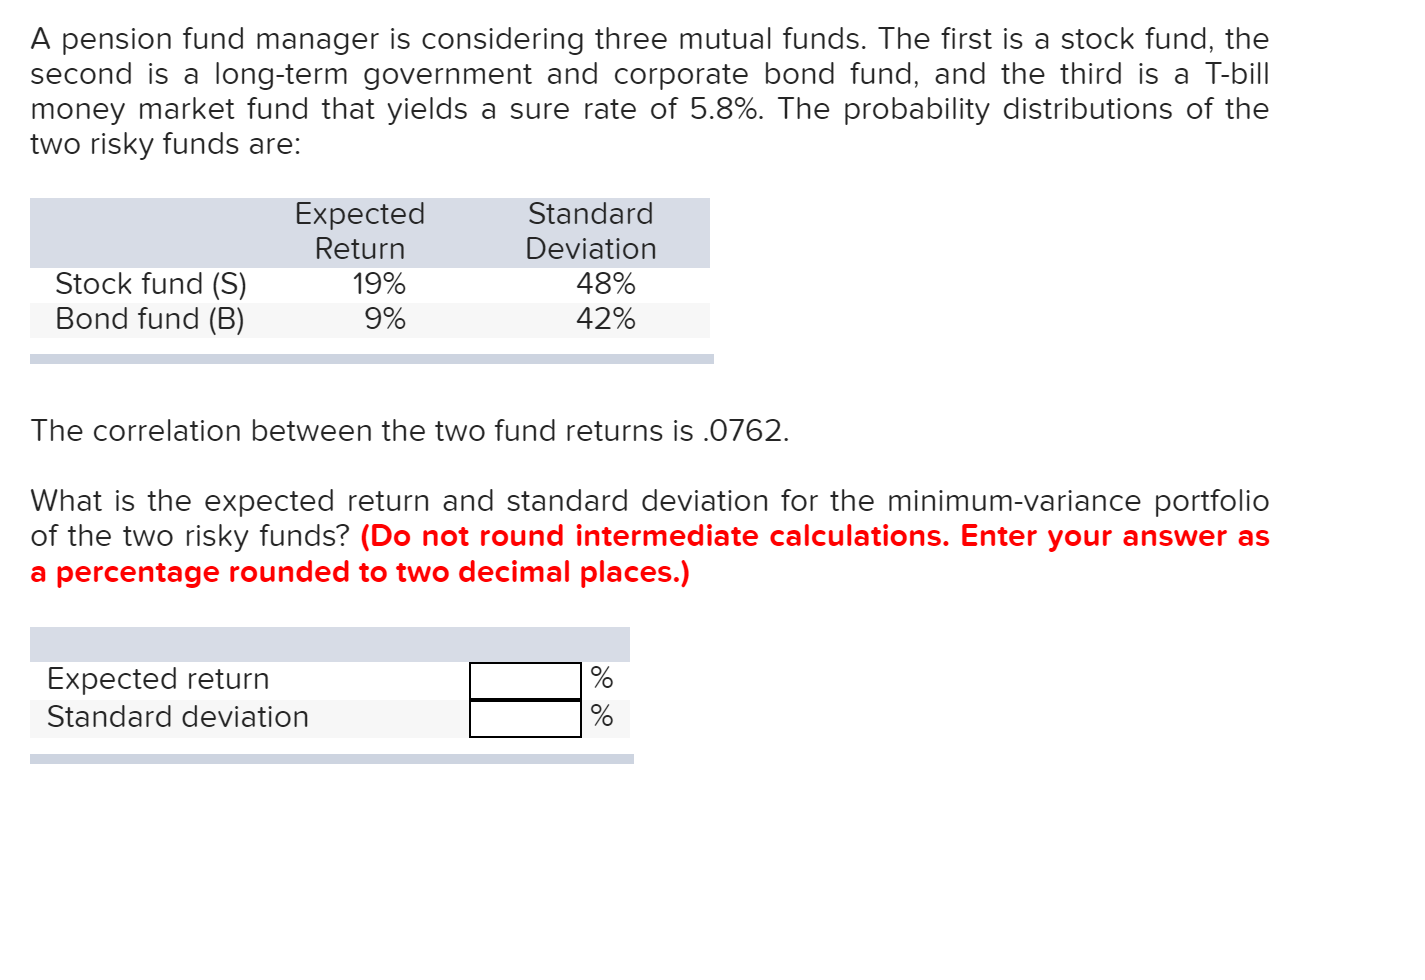 A pension fund manager is considering three mutual funds. The first is a stock fund, the
second is a long-term government and corporate bond fund, and the third is a T-bill
money market fund that yields
two risky funds are:
a sure rate of 5.8%. The probability distributions of the
Expected
Return
19%
Standard
Deviation
Stock fund (S)
Bond fund (B)
48%
42%
9%
The correlation between the two fund returns is .0762
What is the expected return and standard deviation for the minimum-variance portfolio
of the two risky funds? (Do not round intermediate calculations. Enter your answer as
a percentage rounded to two decimal places.)
Expected return
Standard deviation
